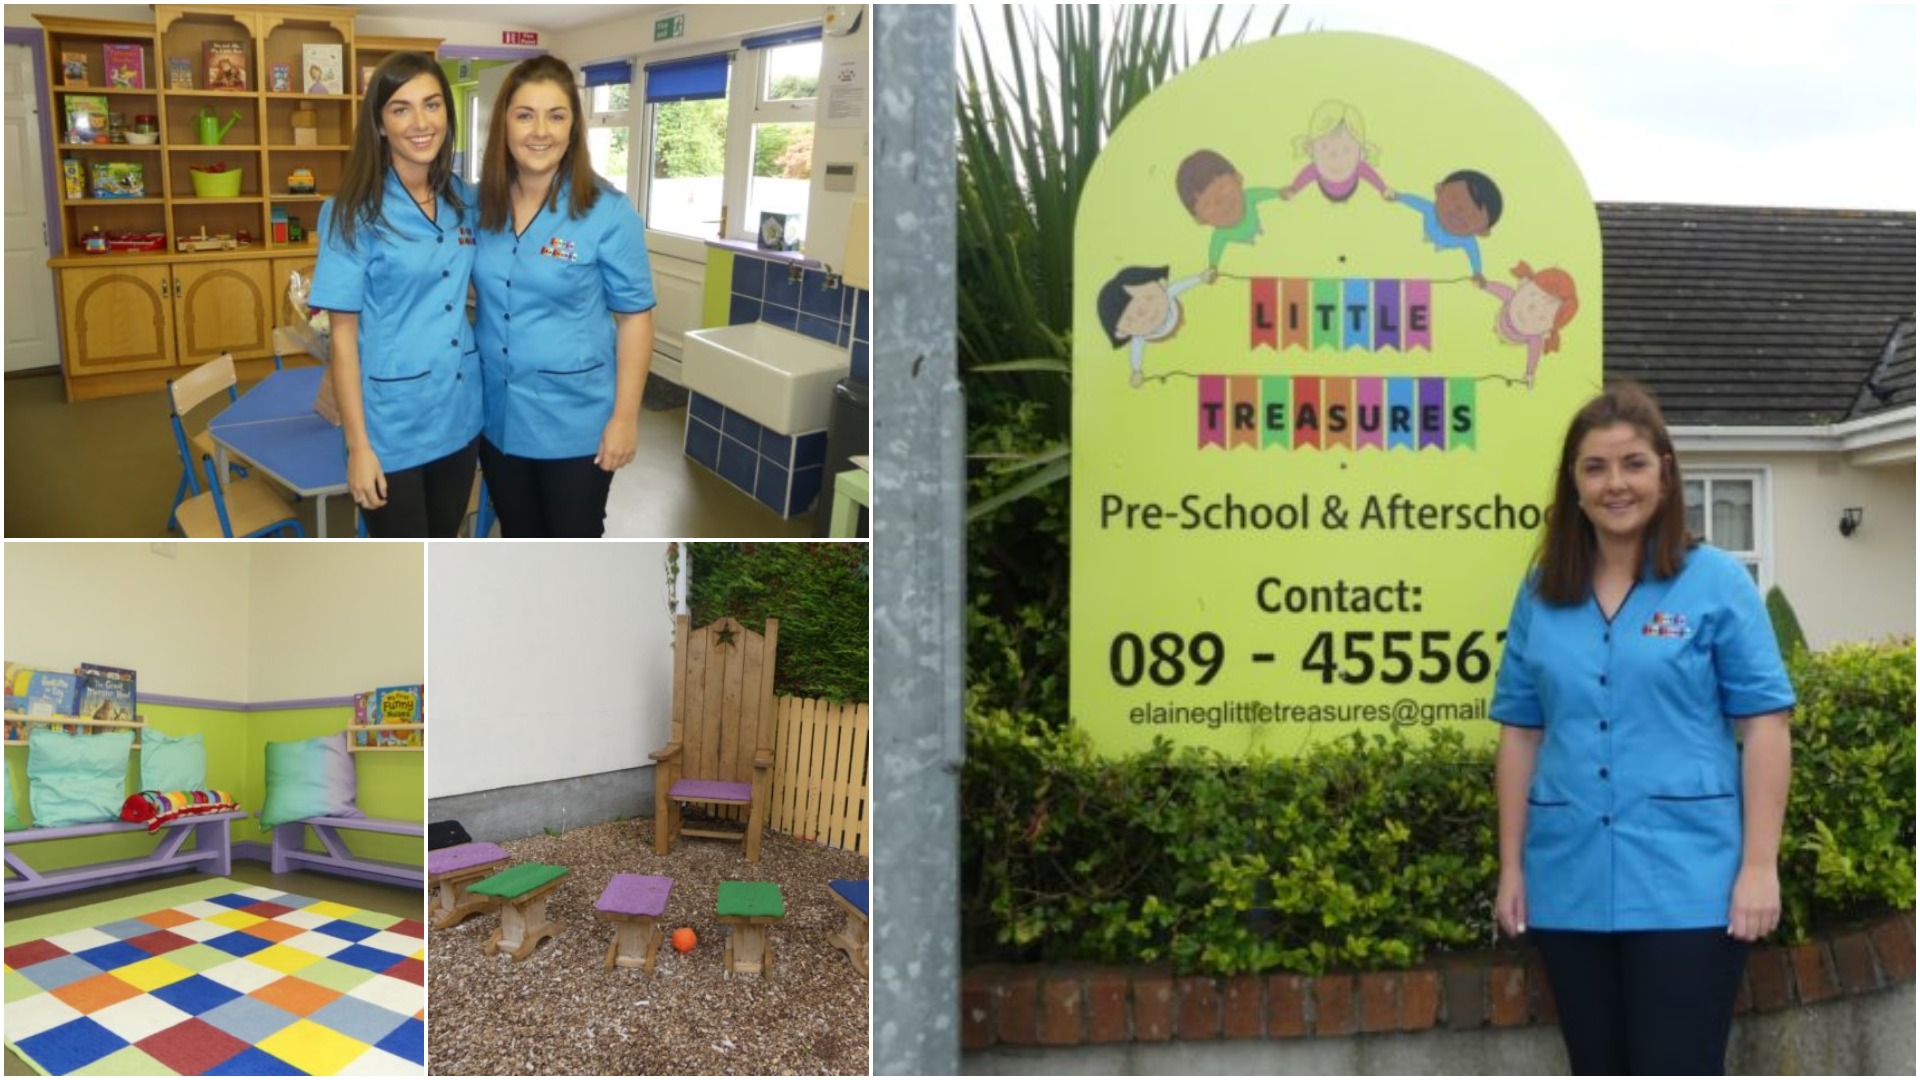 In Pictures Exciting Times As New Playschool And After School Facility Little Treasures Opens For New Term Laois Today